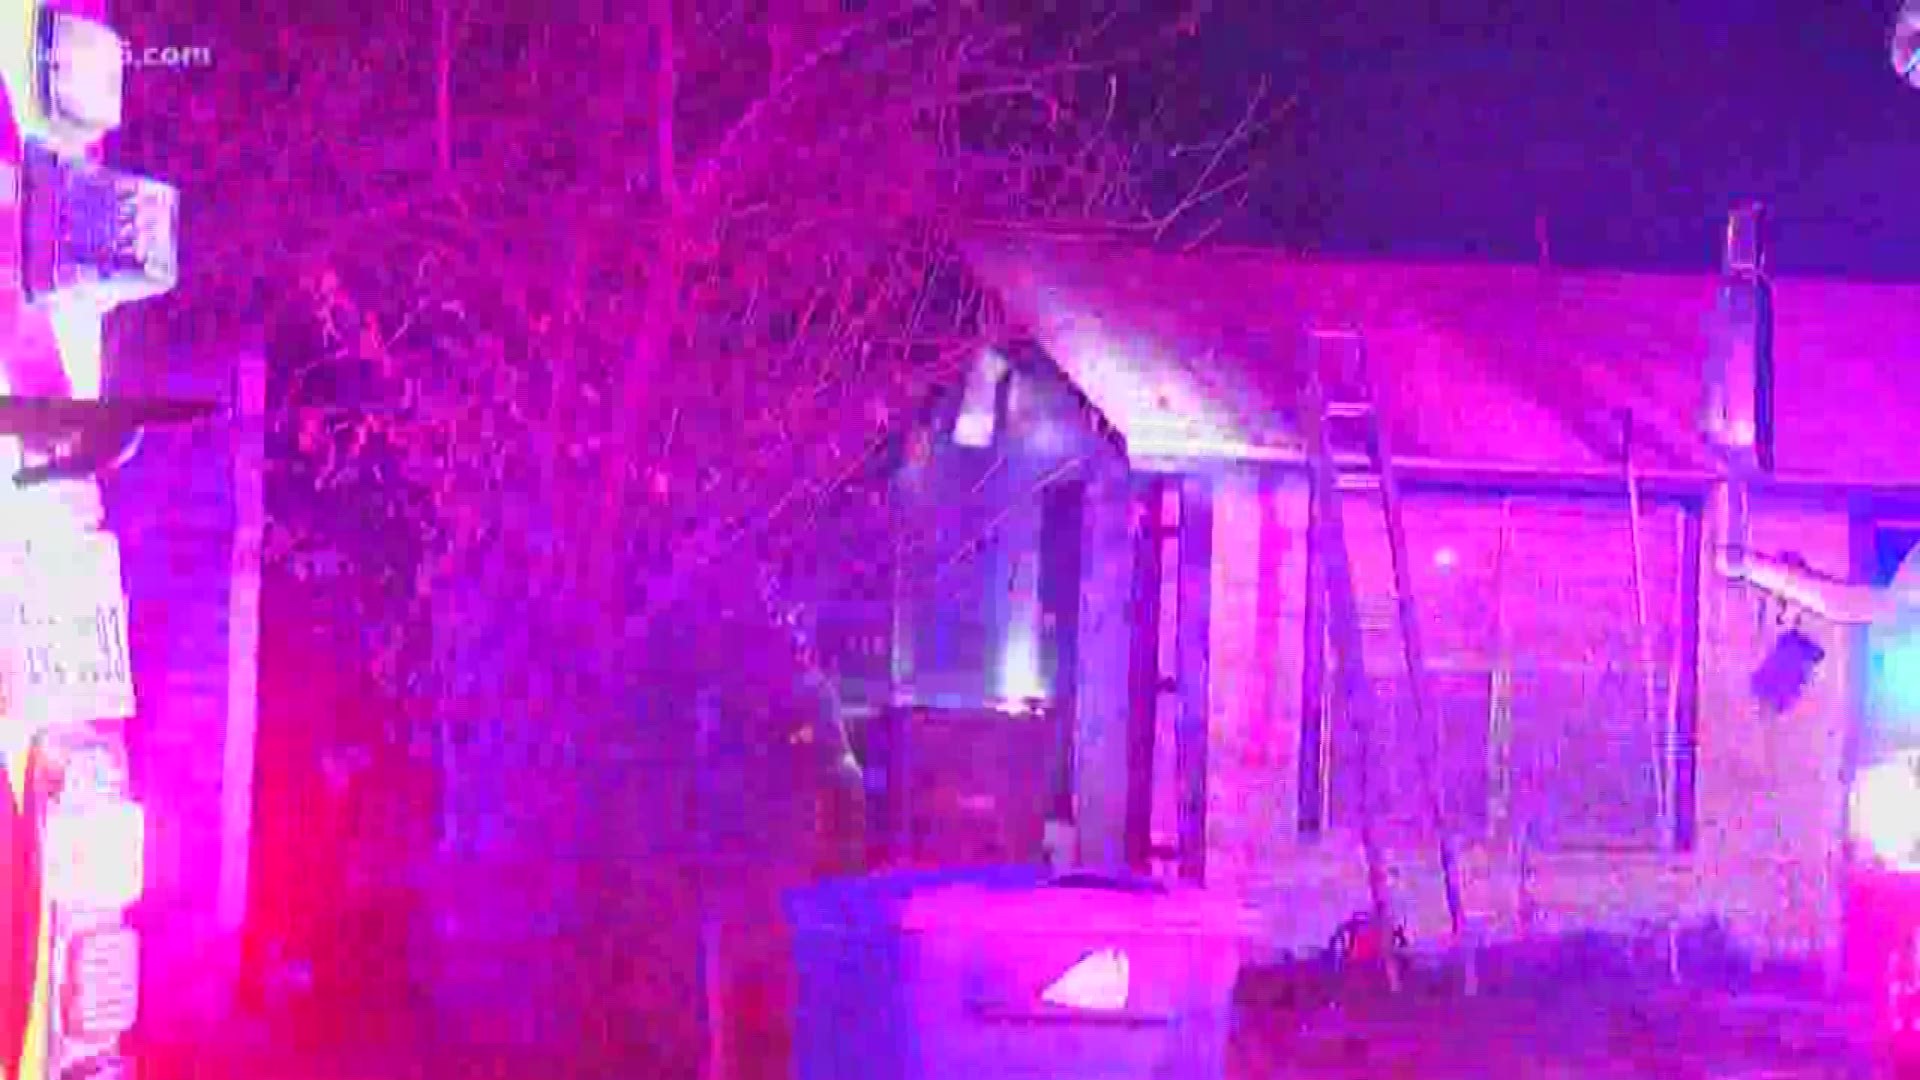 Crews were called out to the home at about 10 p.m. Tuesday night in the 700 block of Larry.